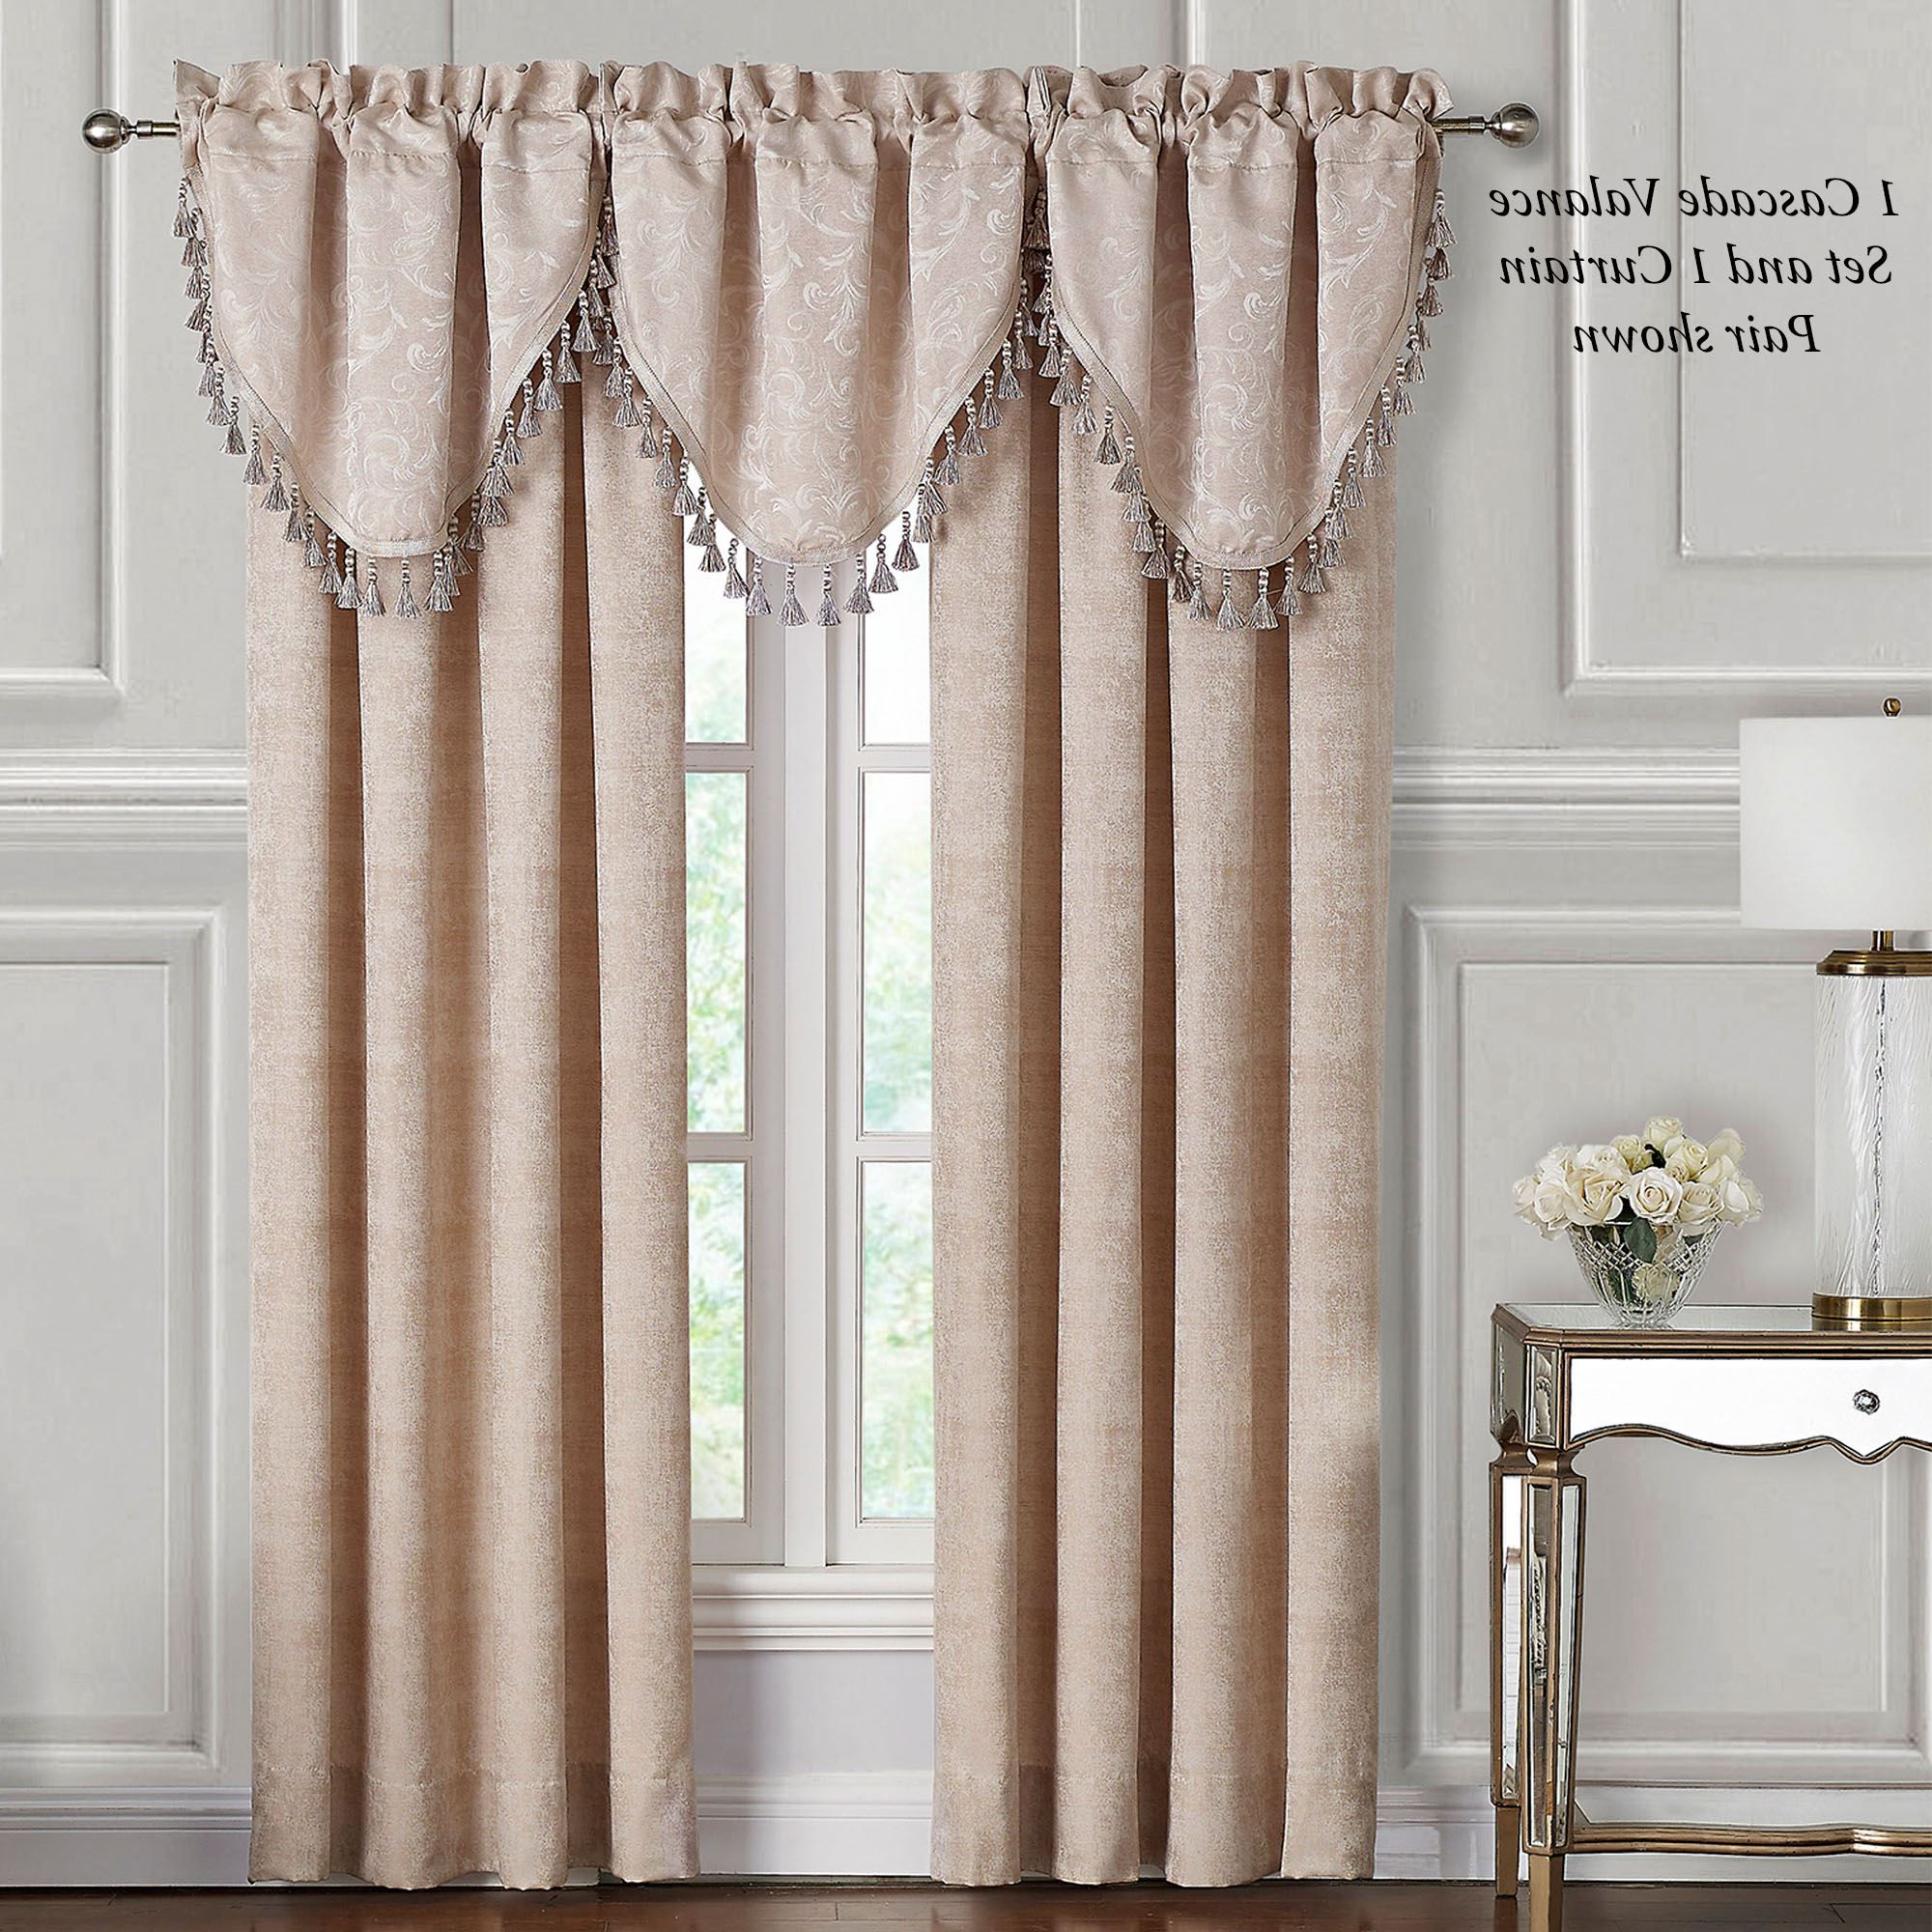 Most Recently Released Gisella Acanthus Leaf Window Treatmentwaterford Linens With Regard To Scroll Leaf 3 Piece Curtain Tier And Valance Sets (View 19 of 20)